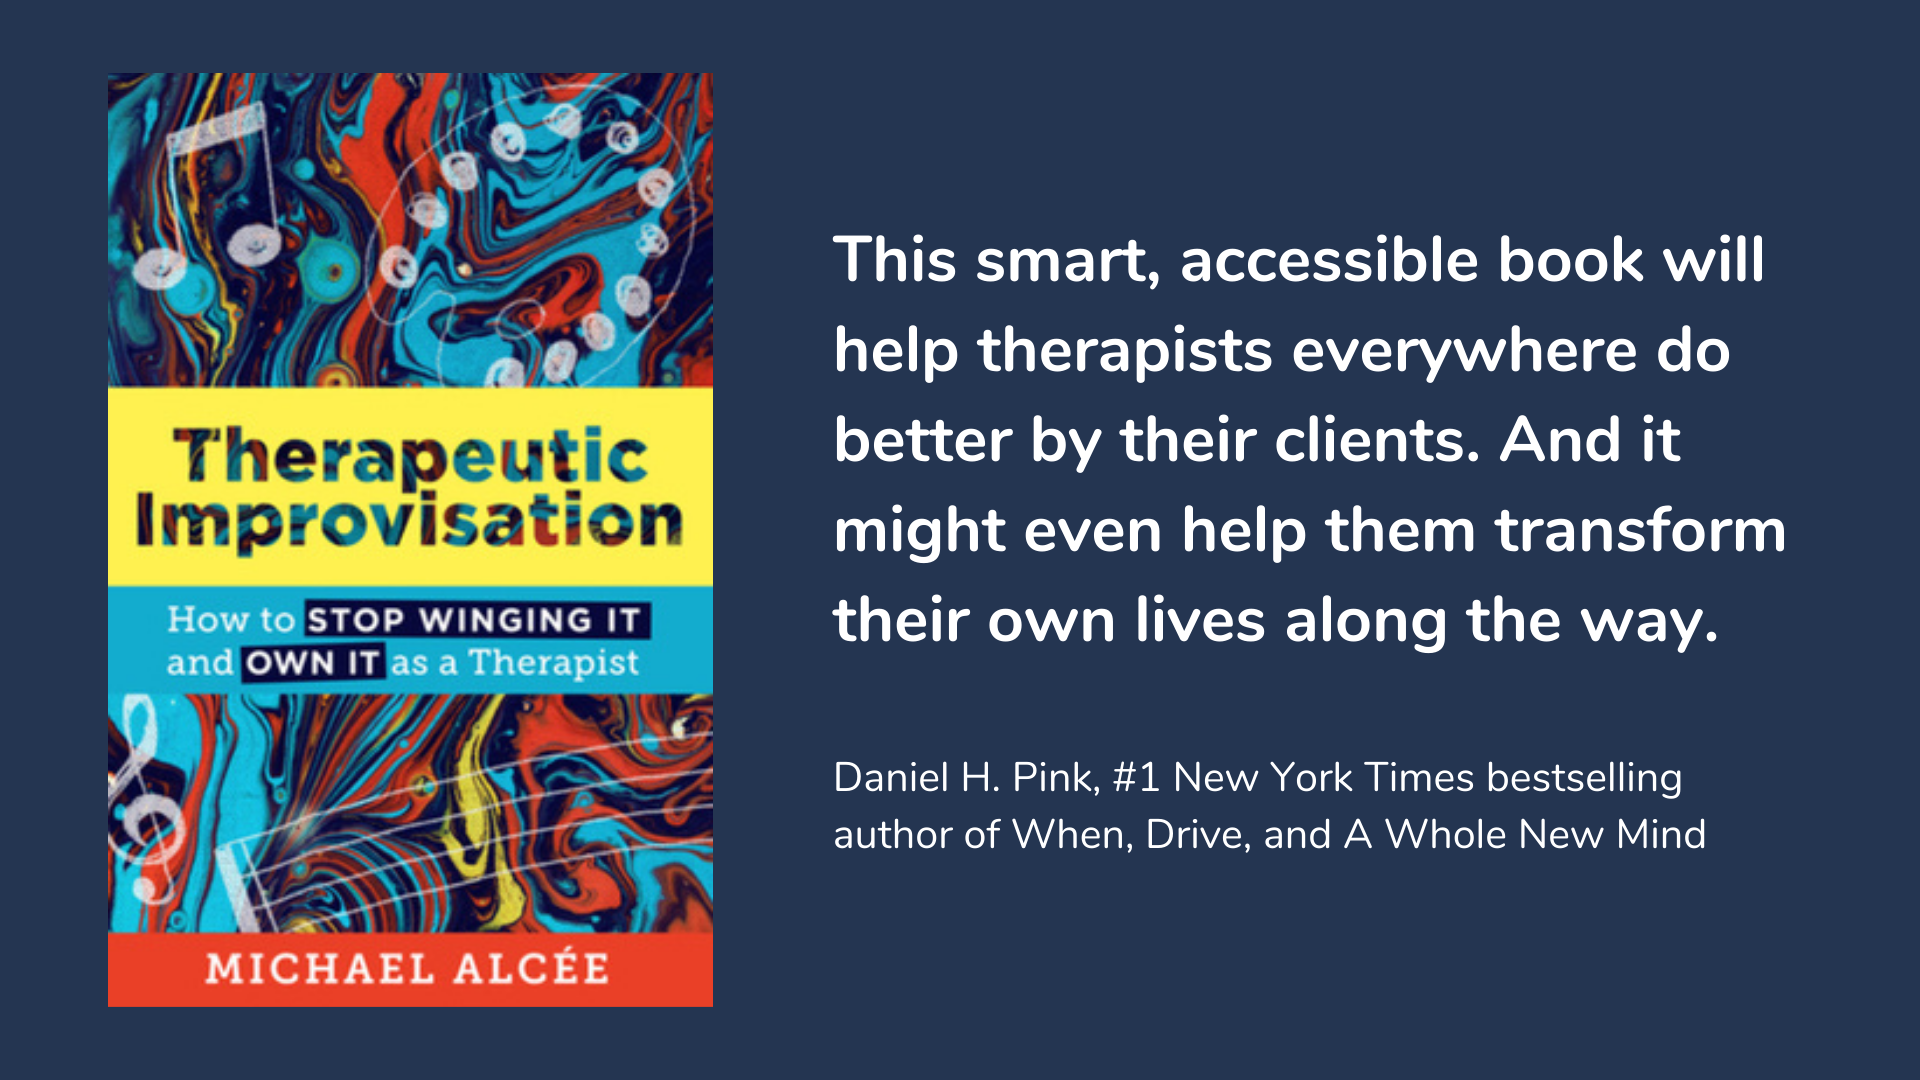 Therapeutic Improvisation: How to Stop Winging It and Own It as a Therapist, book cover and description.